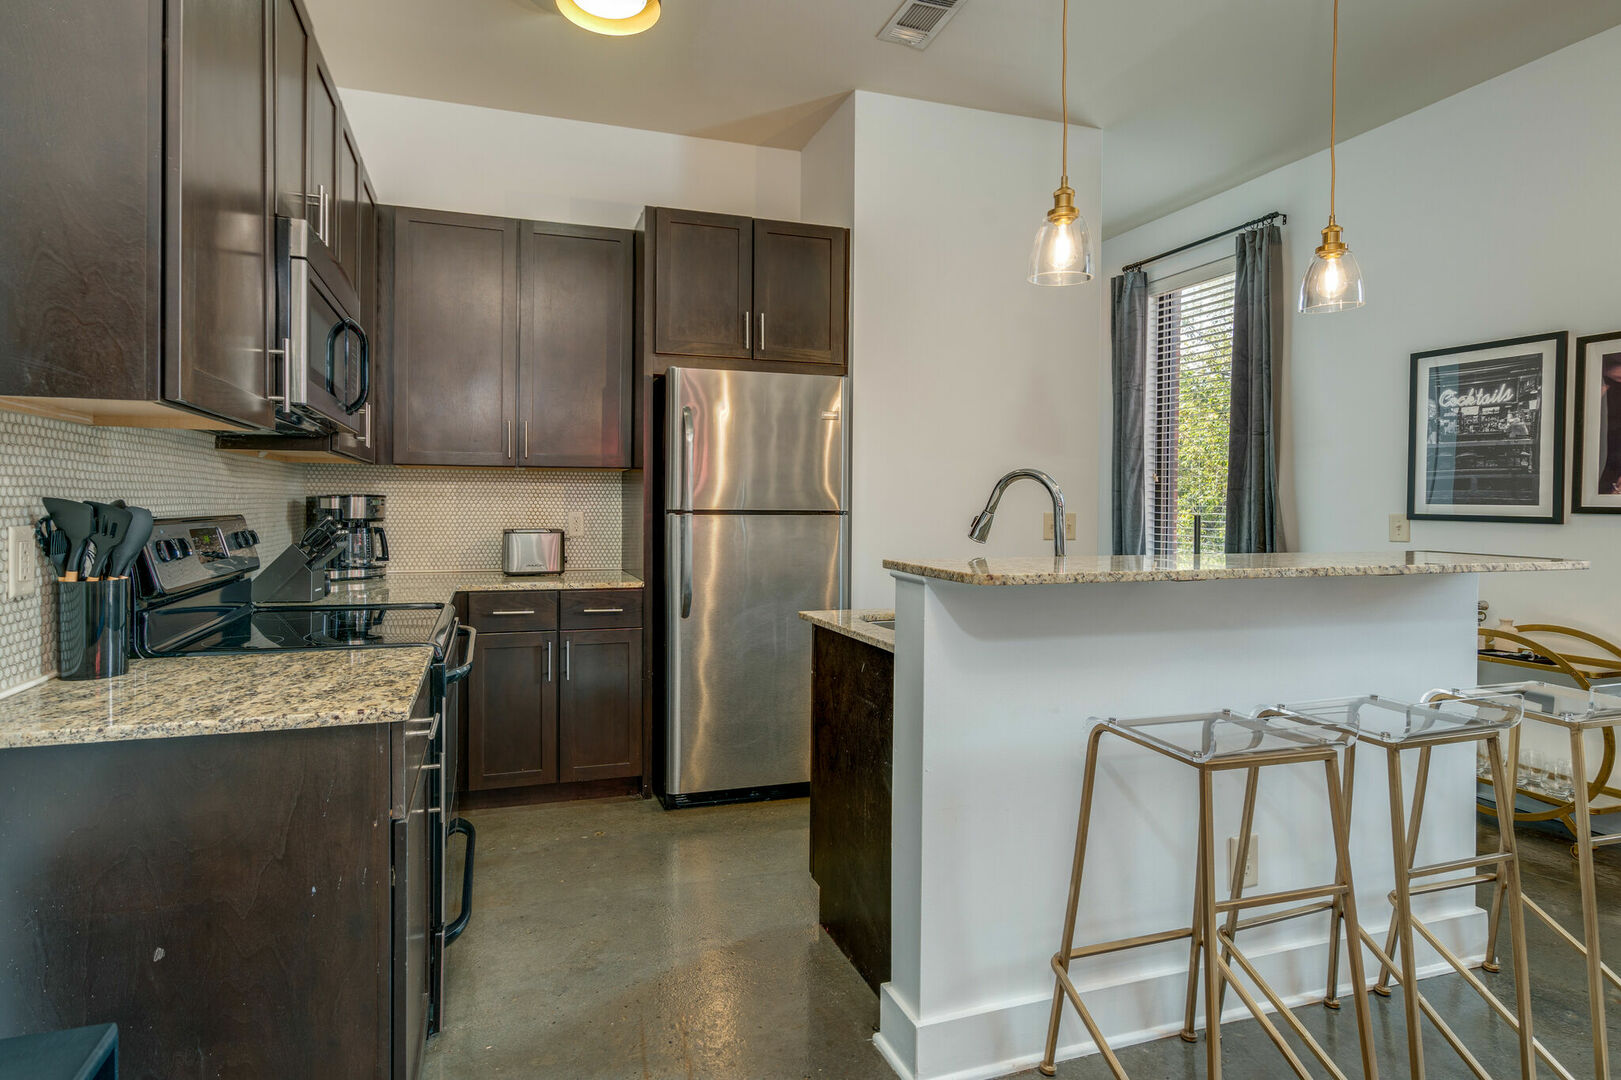 Fully equipped kitchen stocked with your basic cooking essentials. Complete with granite counter tops, stainless steel appliances, and breakfast bar seating.